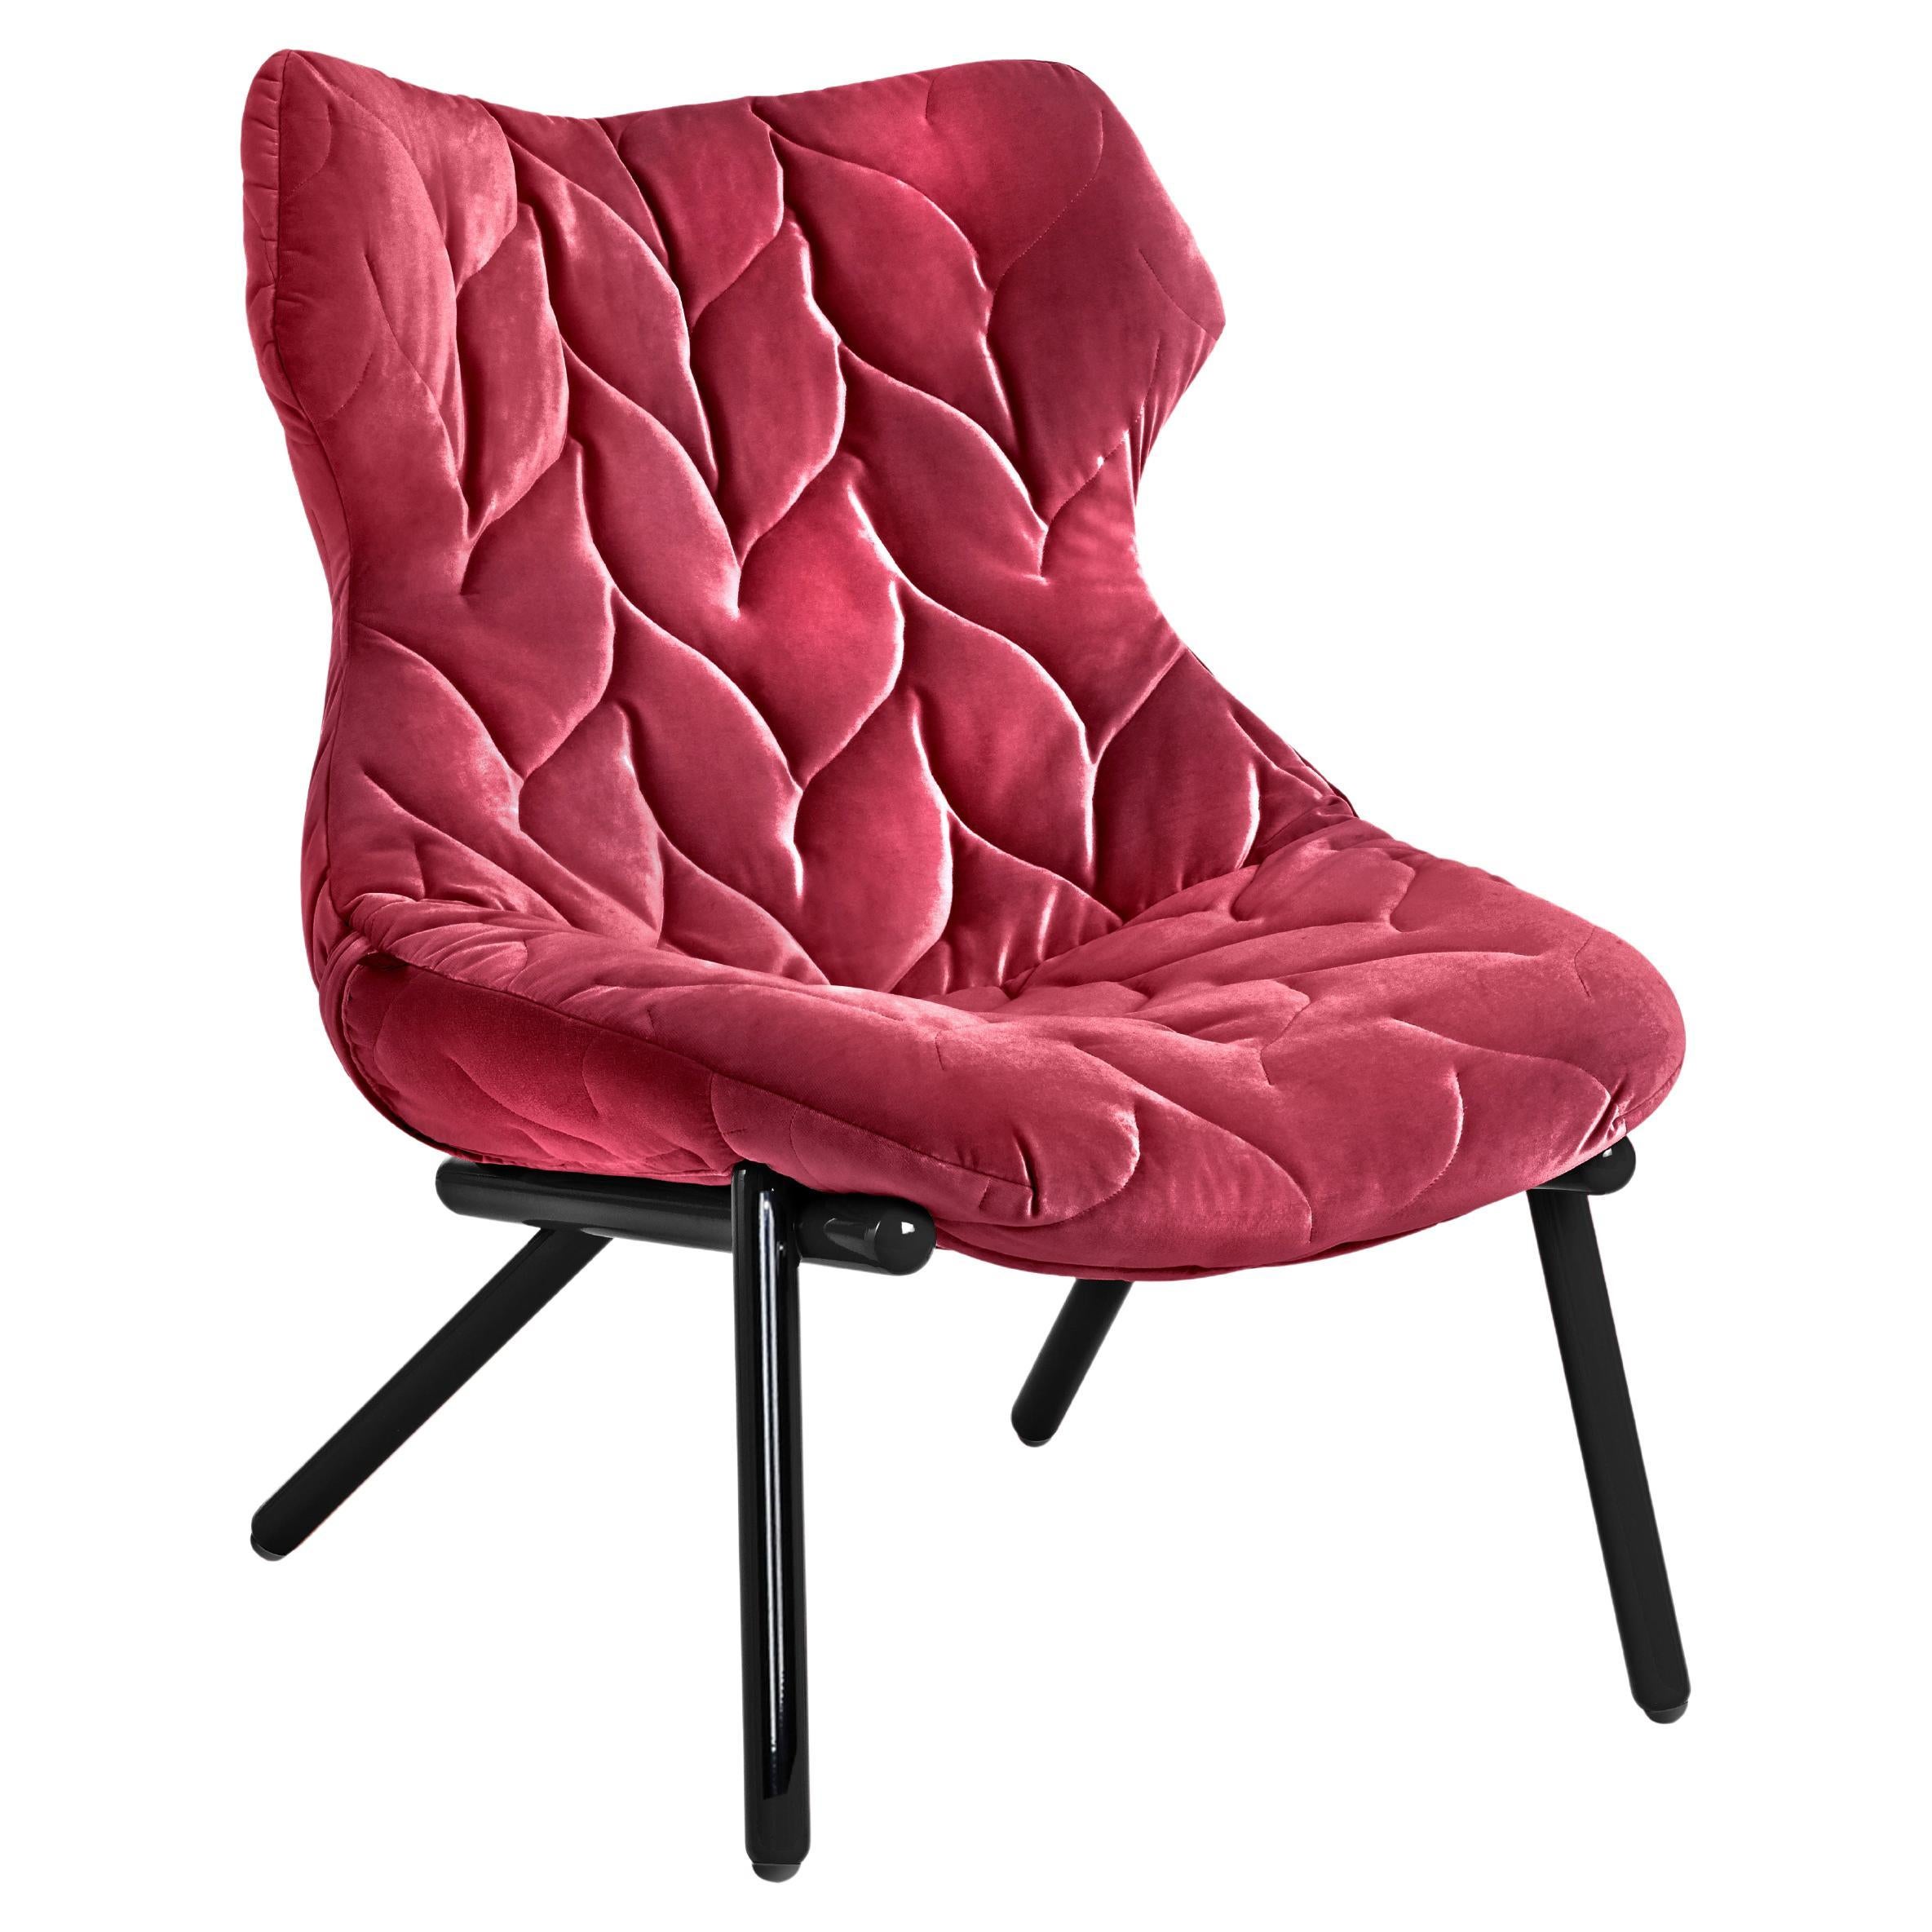 Kartell Foliage Armchair in Cardinal Red by Patricia Urquiola